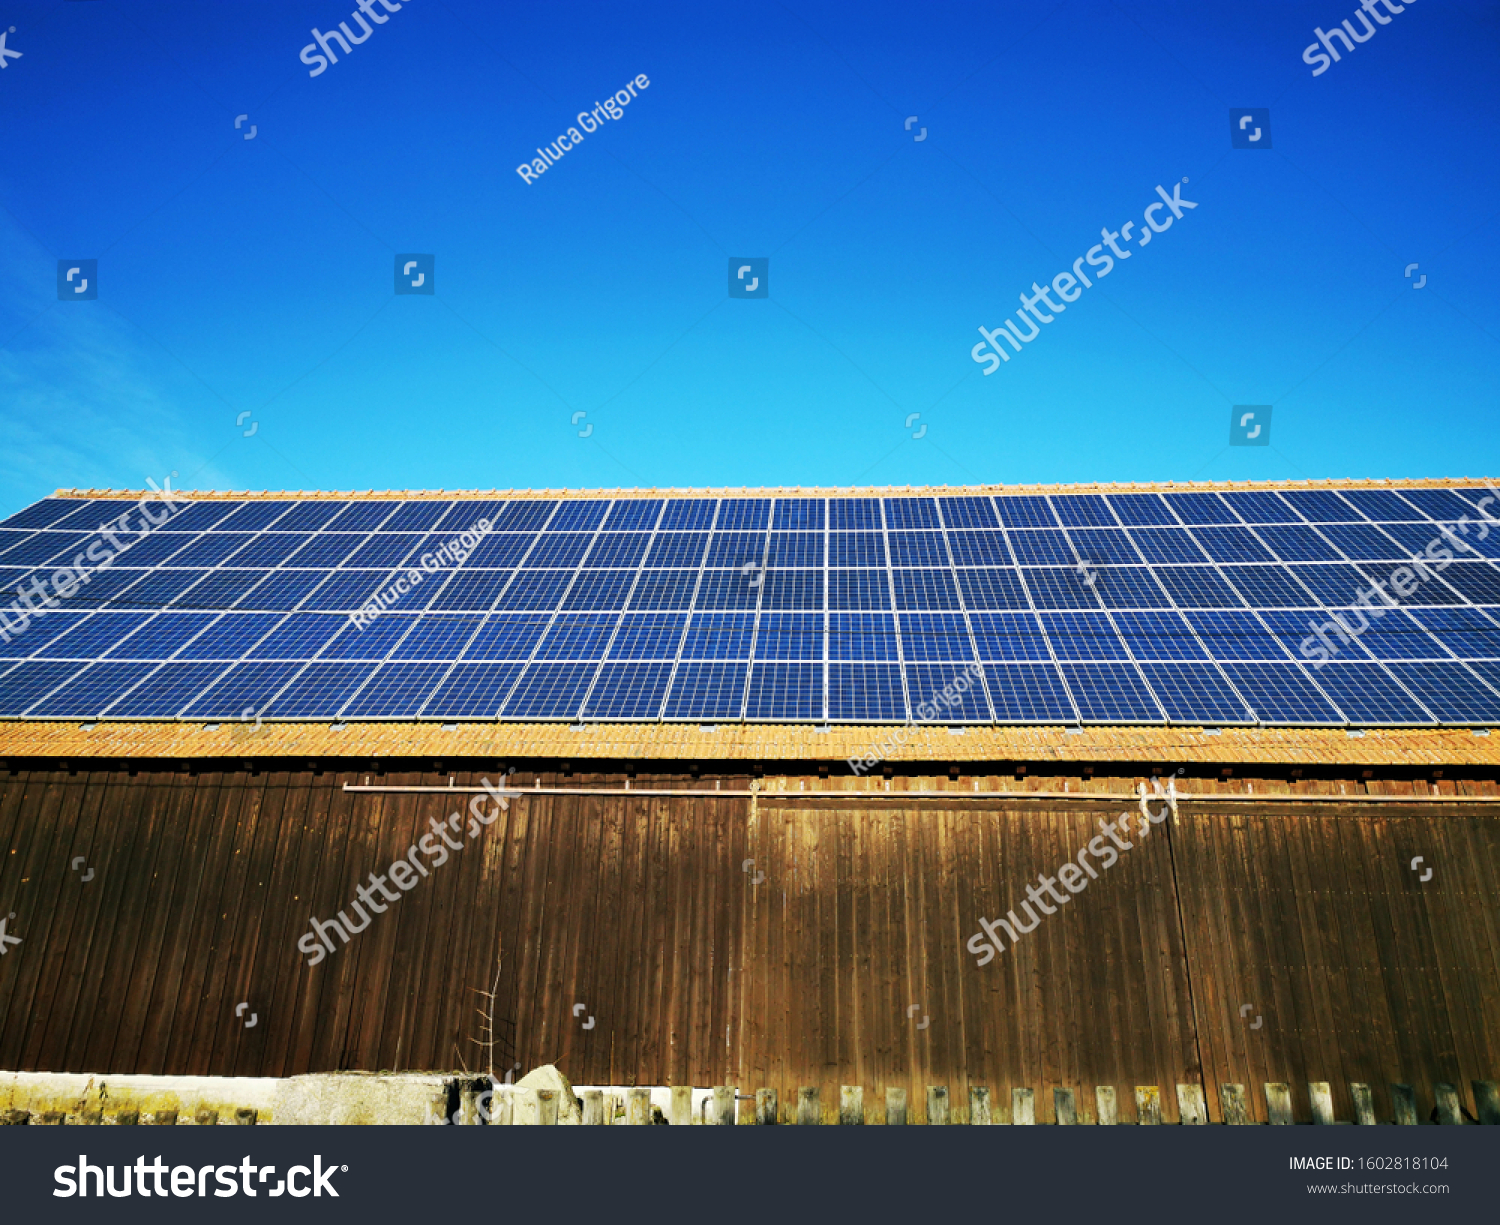 Photovoltaic panels or solar panels on a old wooden barn,with a beautiful blue sky on background,in a small village in the Bavarian south region of Germany ,Europe. #1602818104